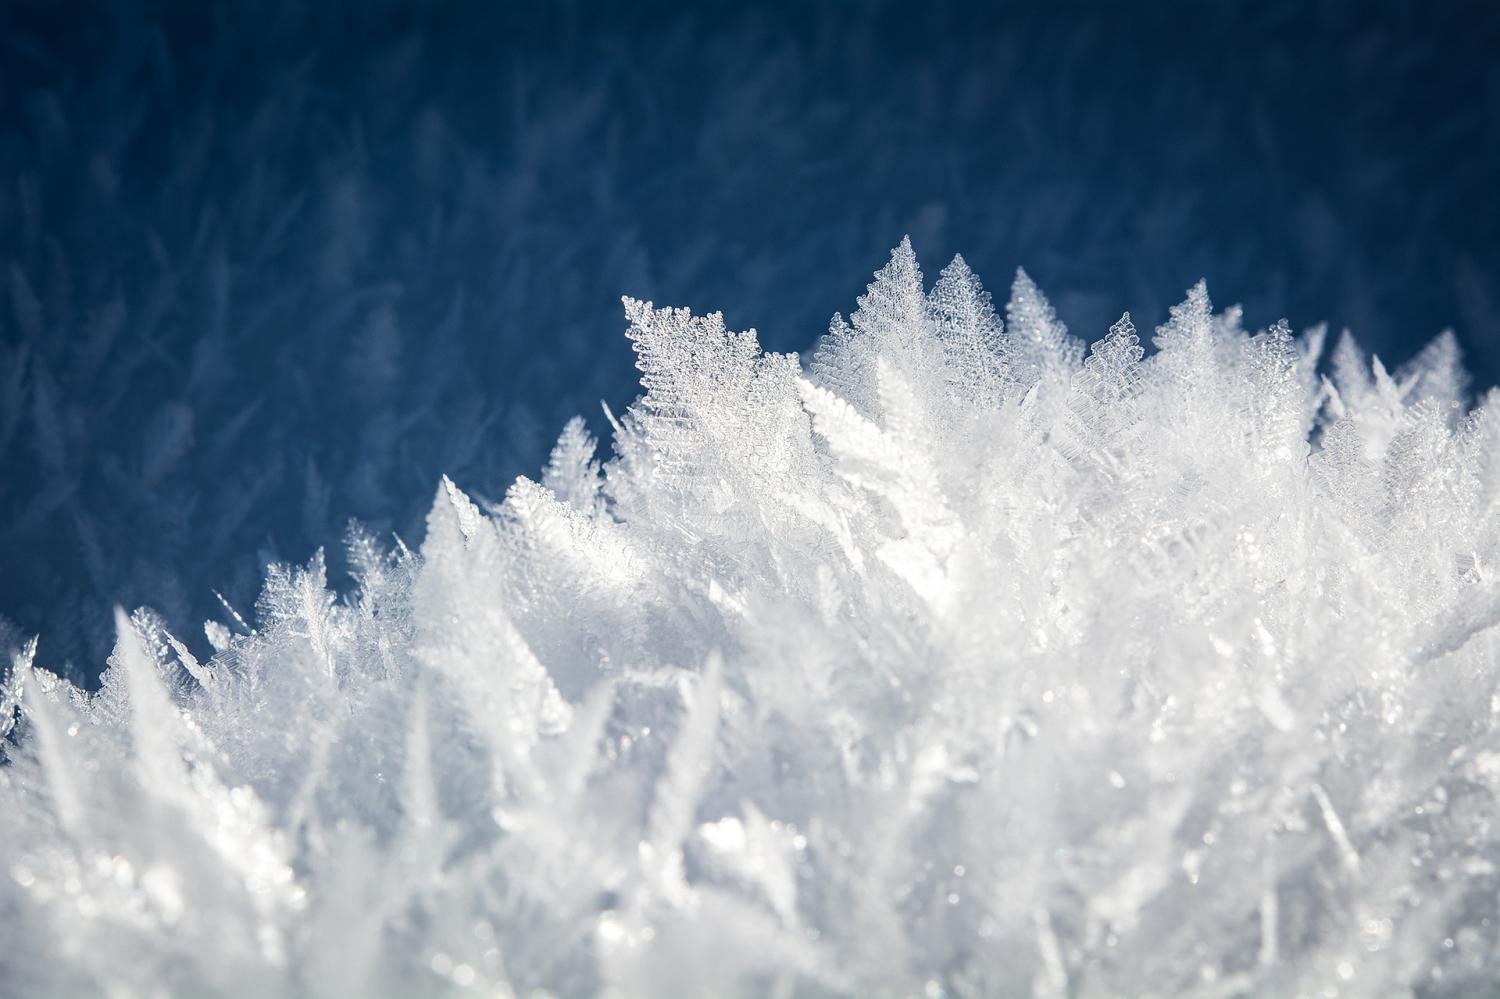 New model clarifies why water freezes at a range of temperatures